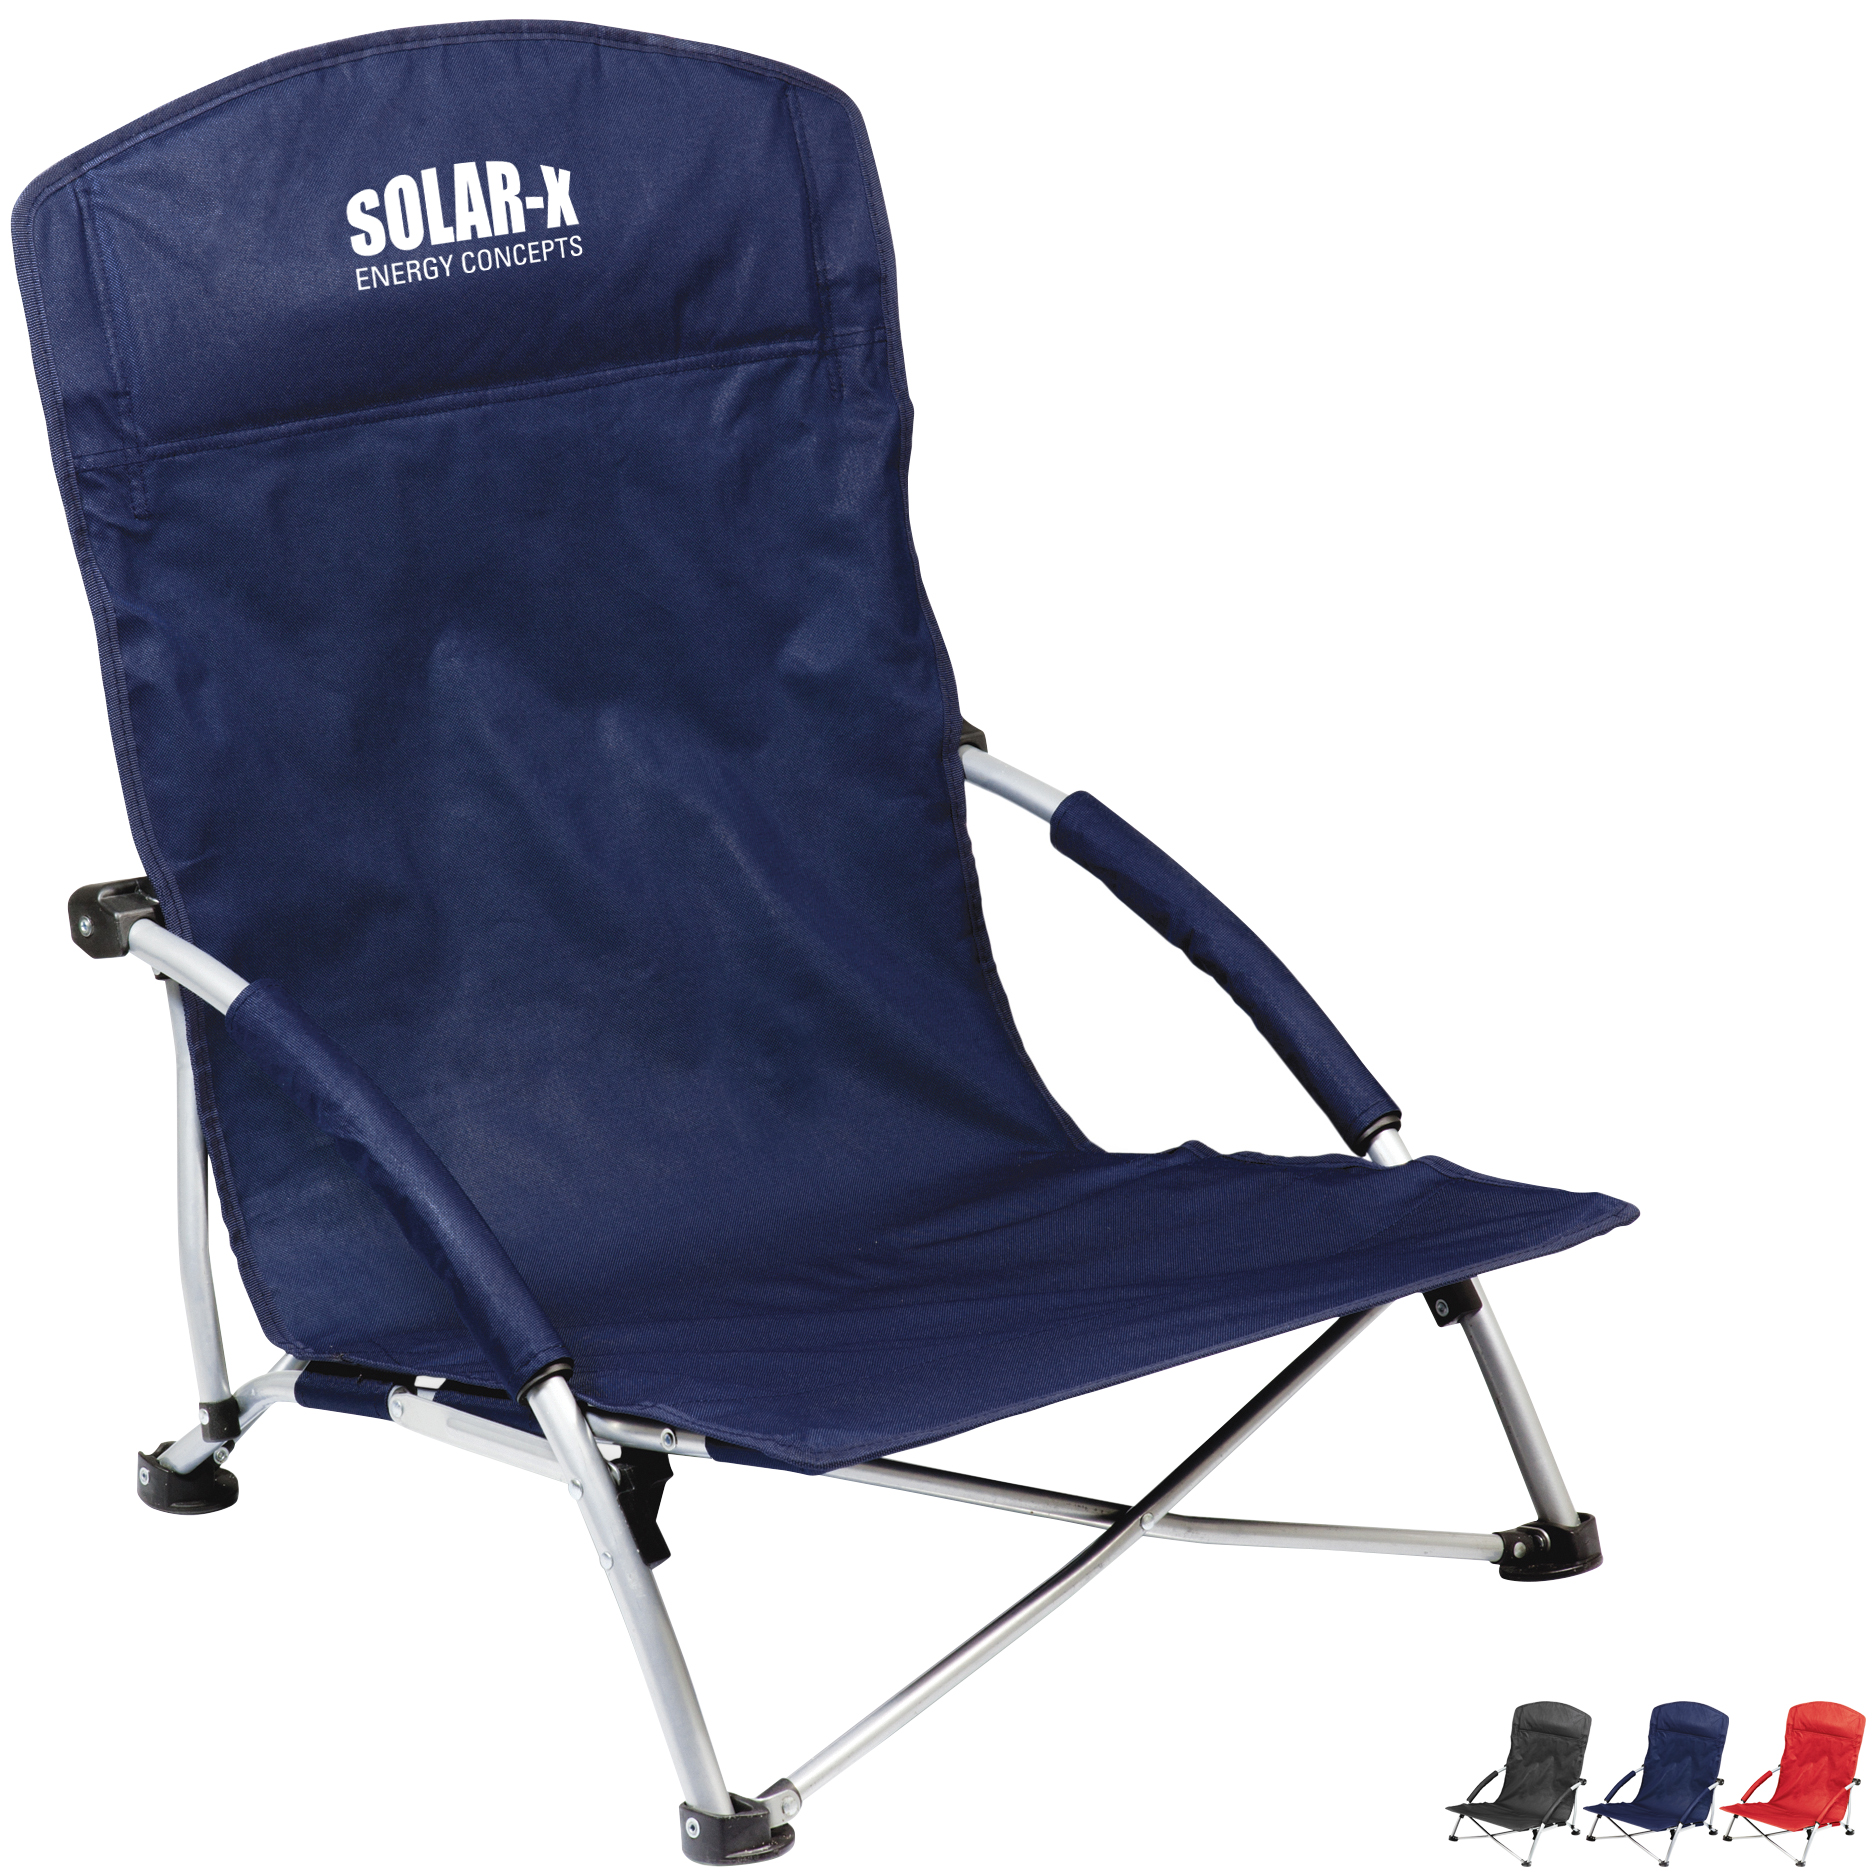 Promotional Outdoor Chairs Promotional Folding Chairs Health Promotions Now